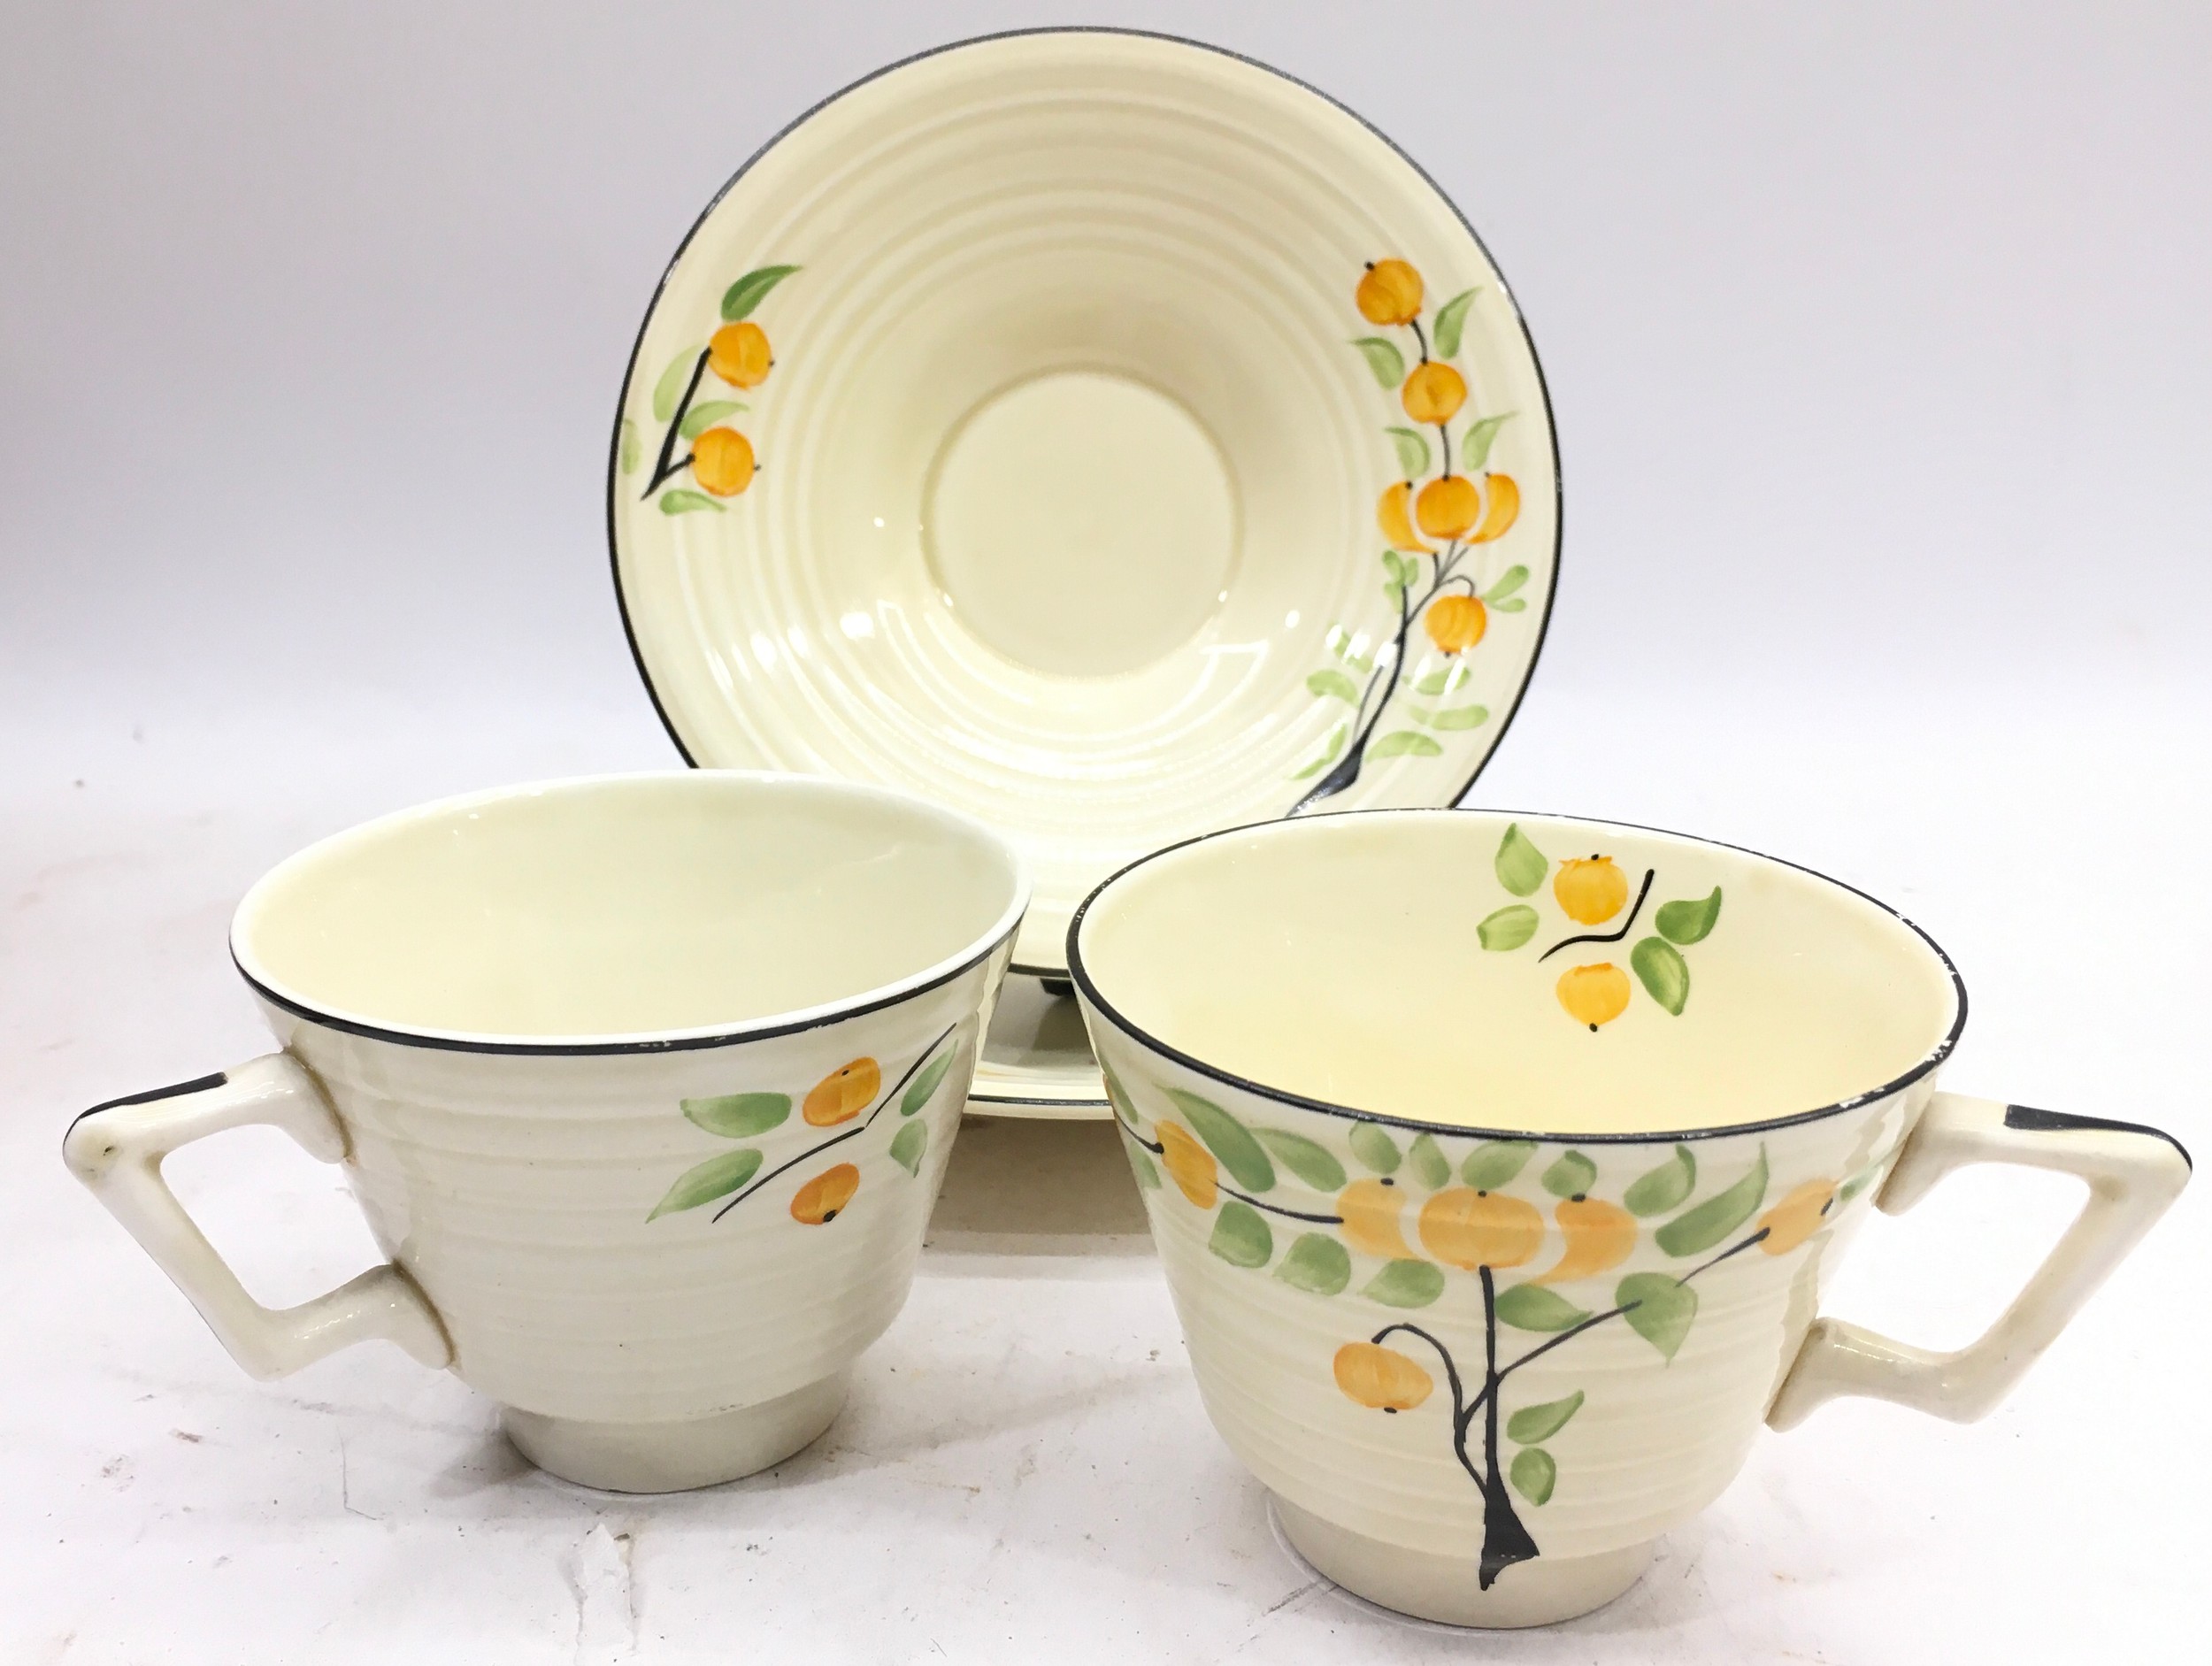 Art Deco Crown Ducal tea for two set with orange tree pattern - Image 3 of 4